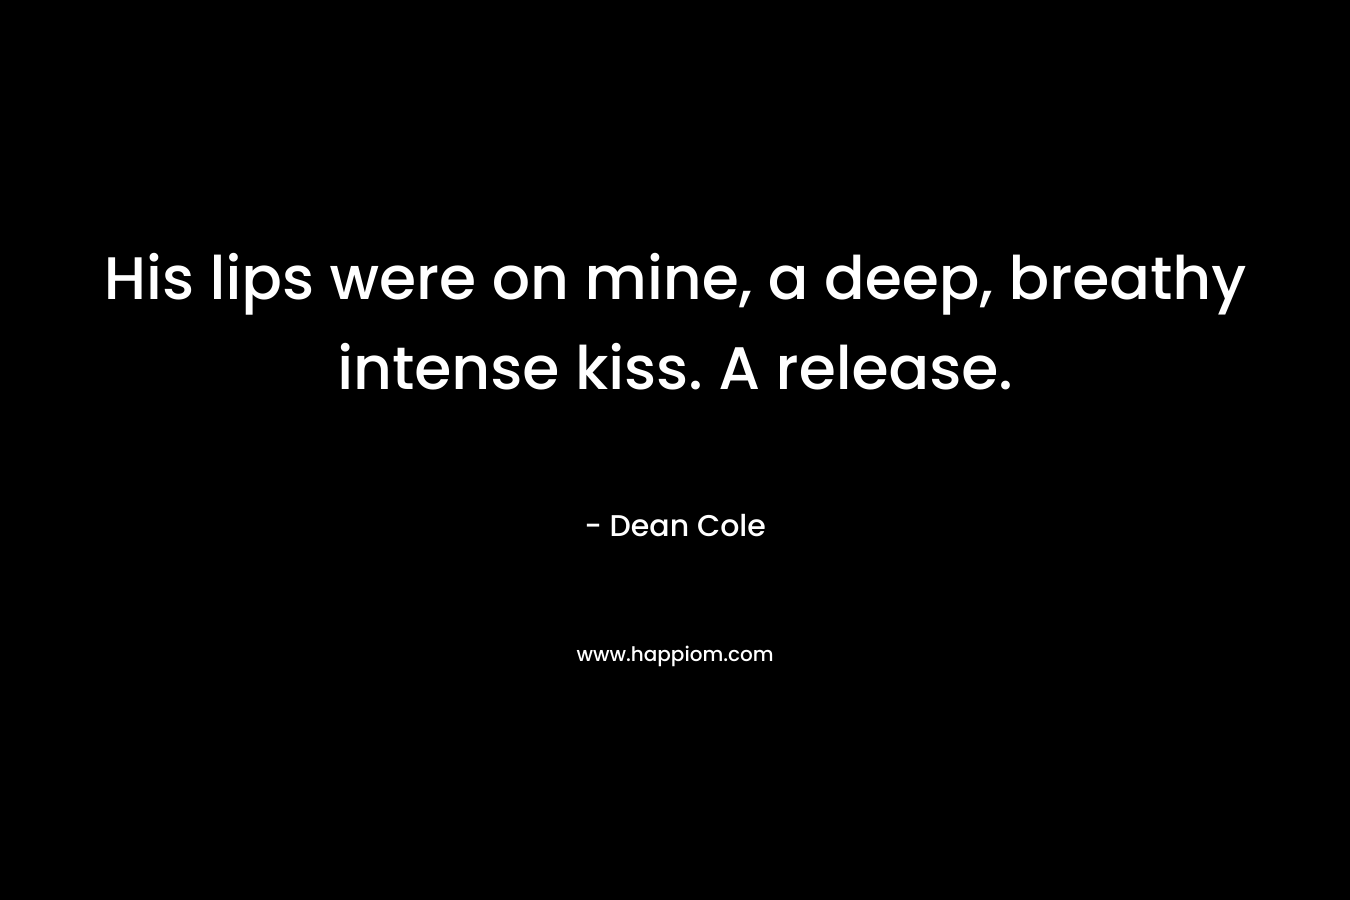 His lips were on mine, a deep, breathy intense kiss. A release.